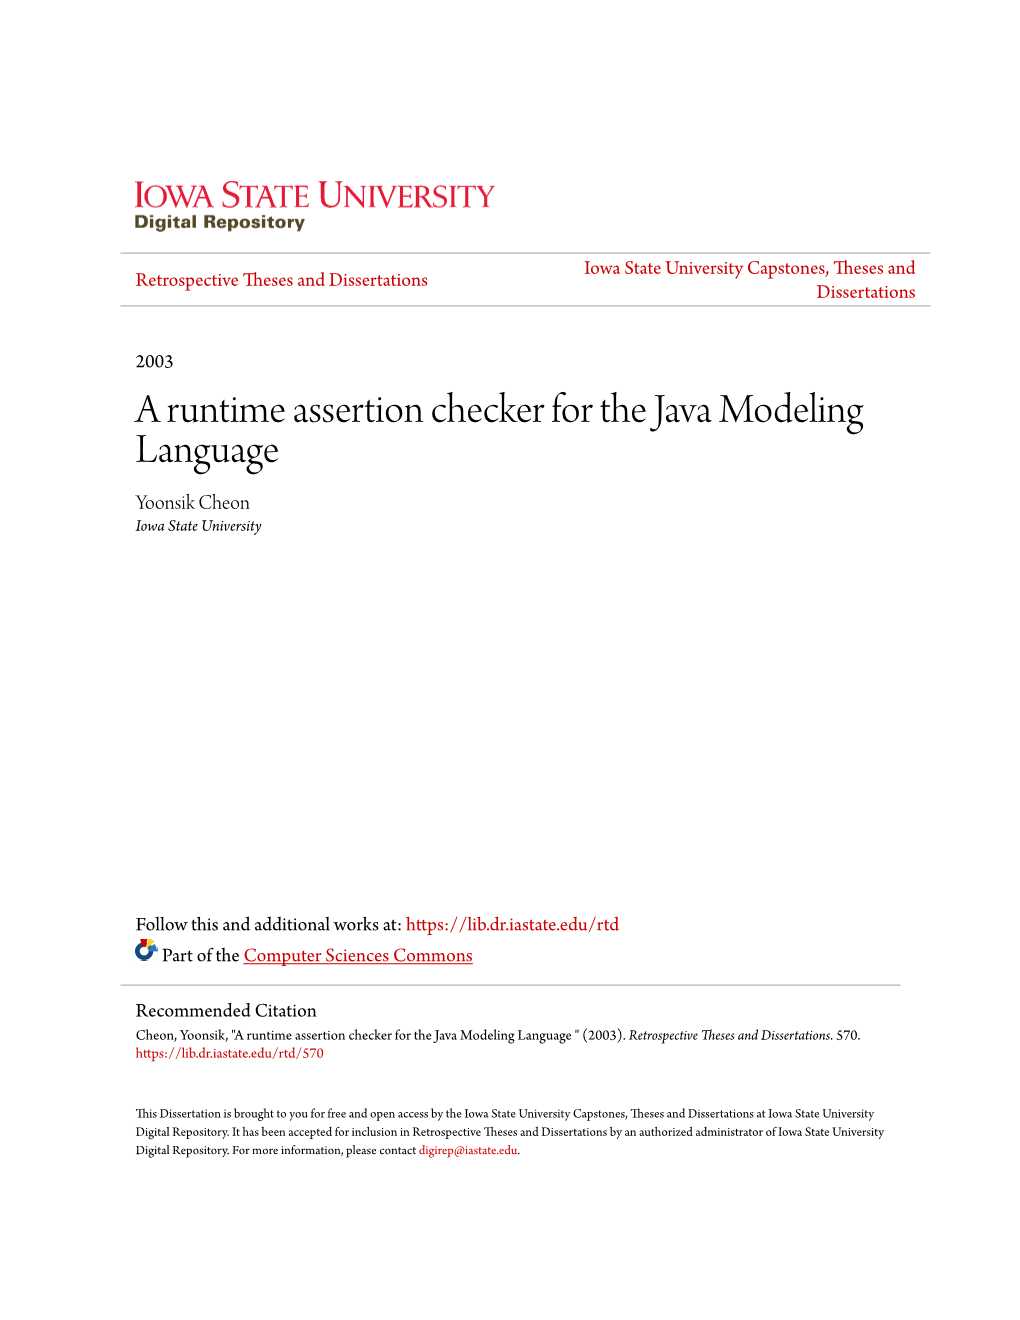 A Runtime Assertion Checker for the Java Modeling Language Yoonsik Cheon Iowa State University